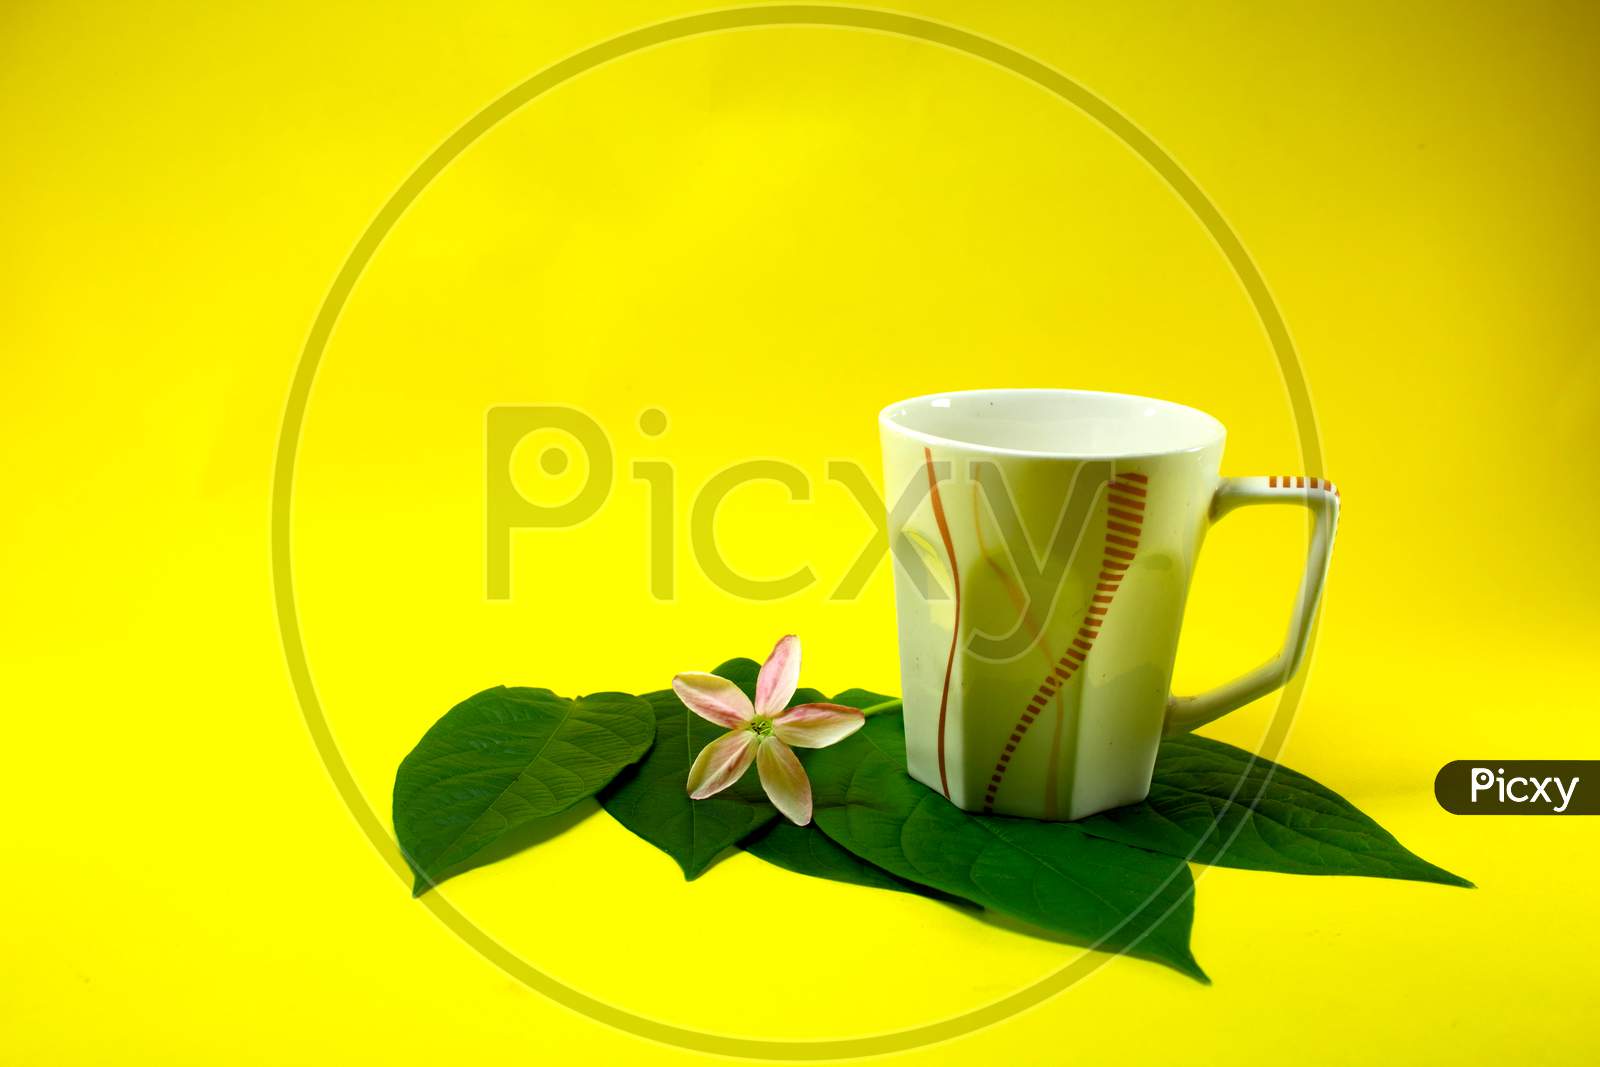 Tea or coffee cup with flowers and leaves